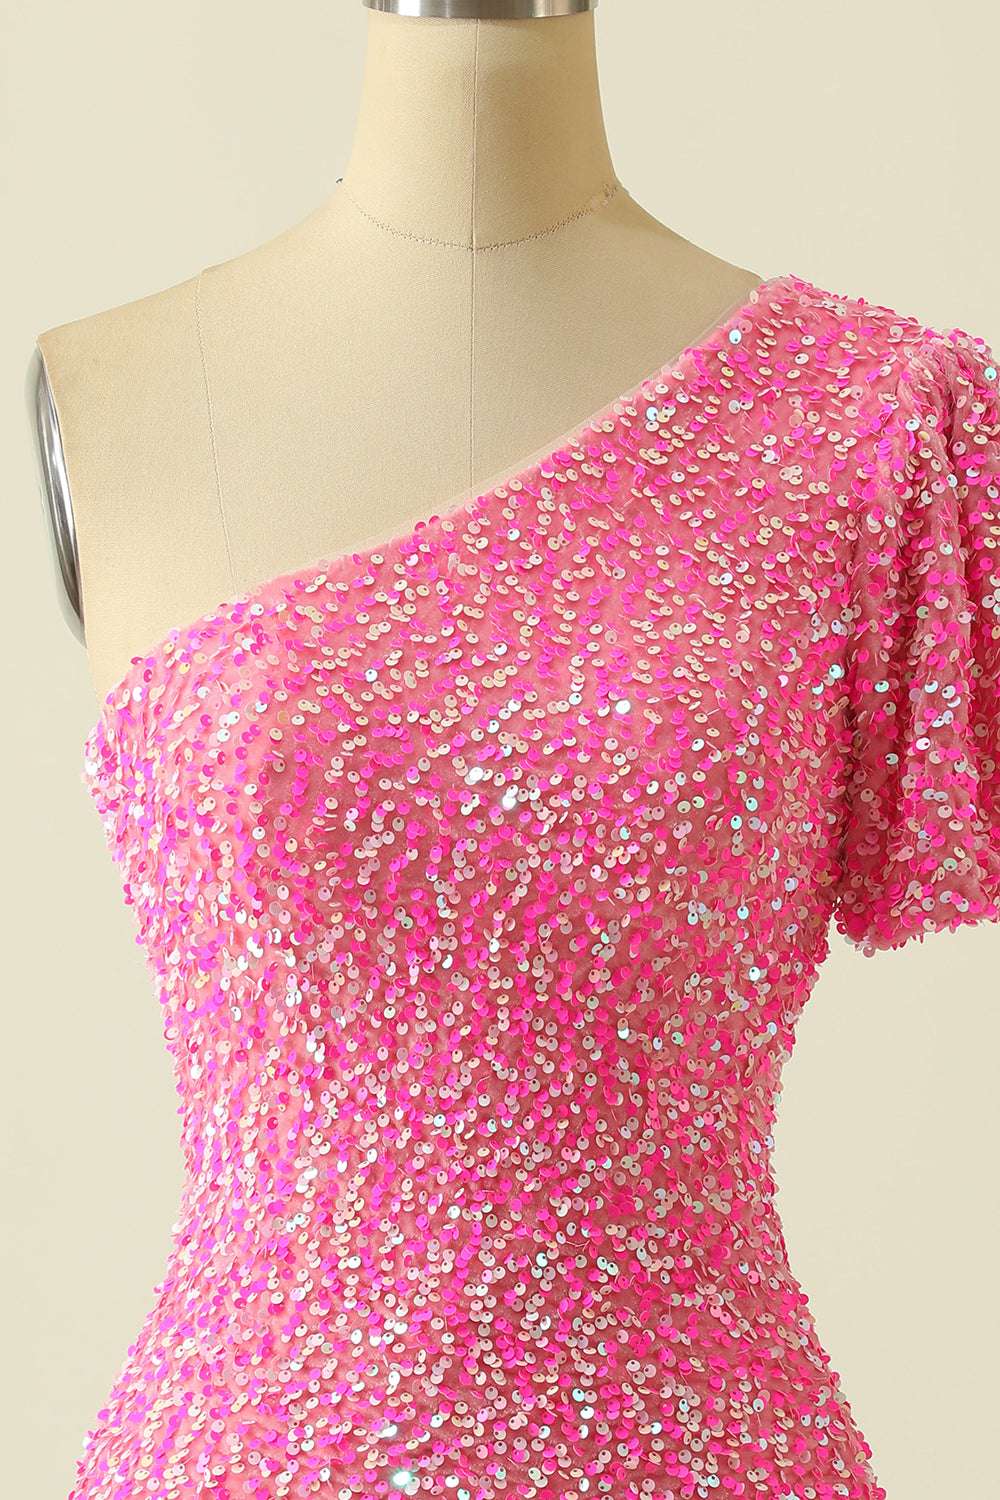 Pink Sequin One-Sleeve Bodycon Homecoming Dress